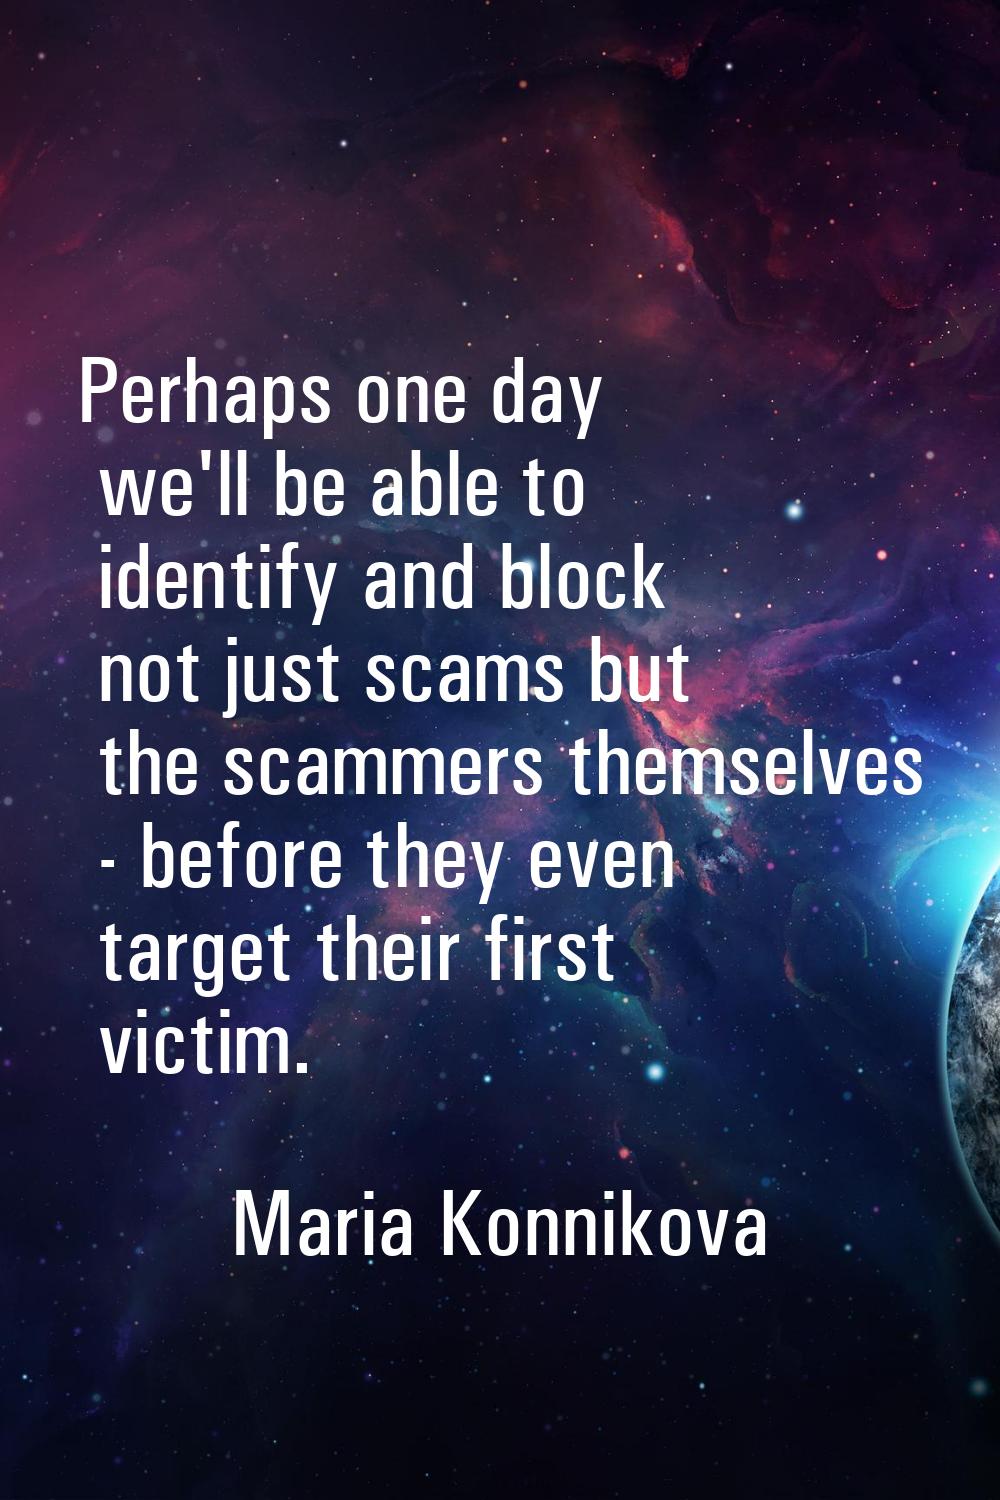 Perhaps one day we'll be able to identify and block not just scams but the scammers themselves - be